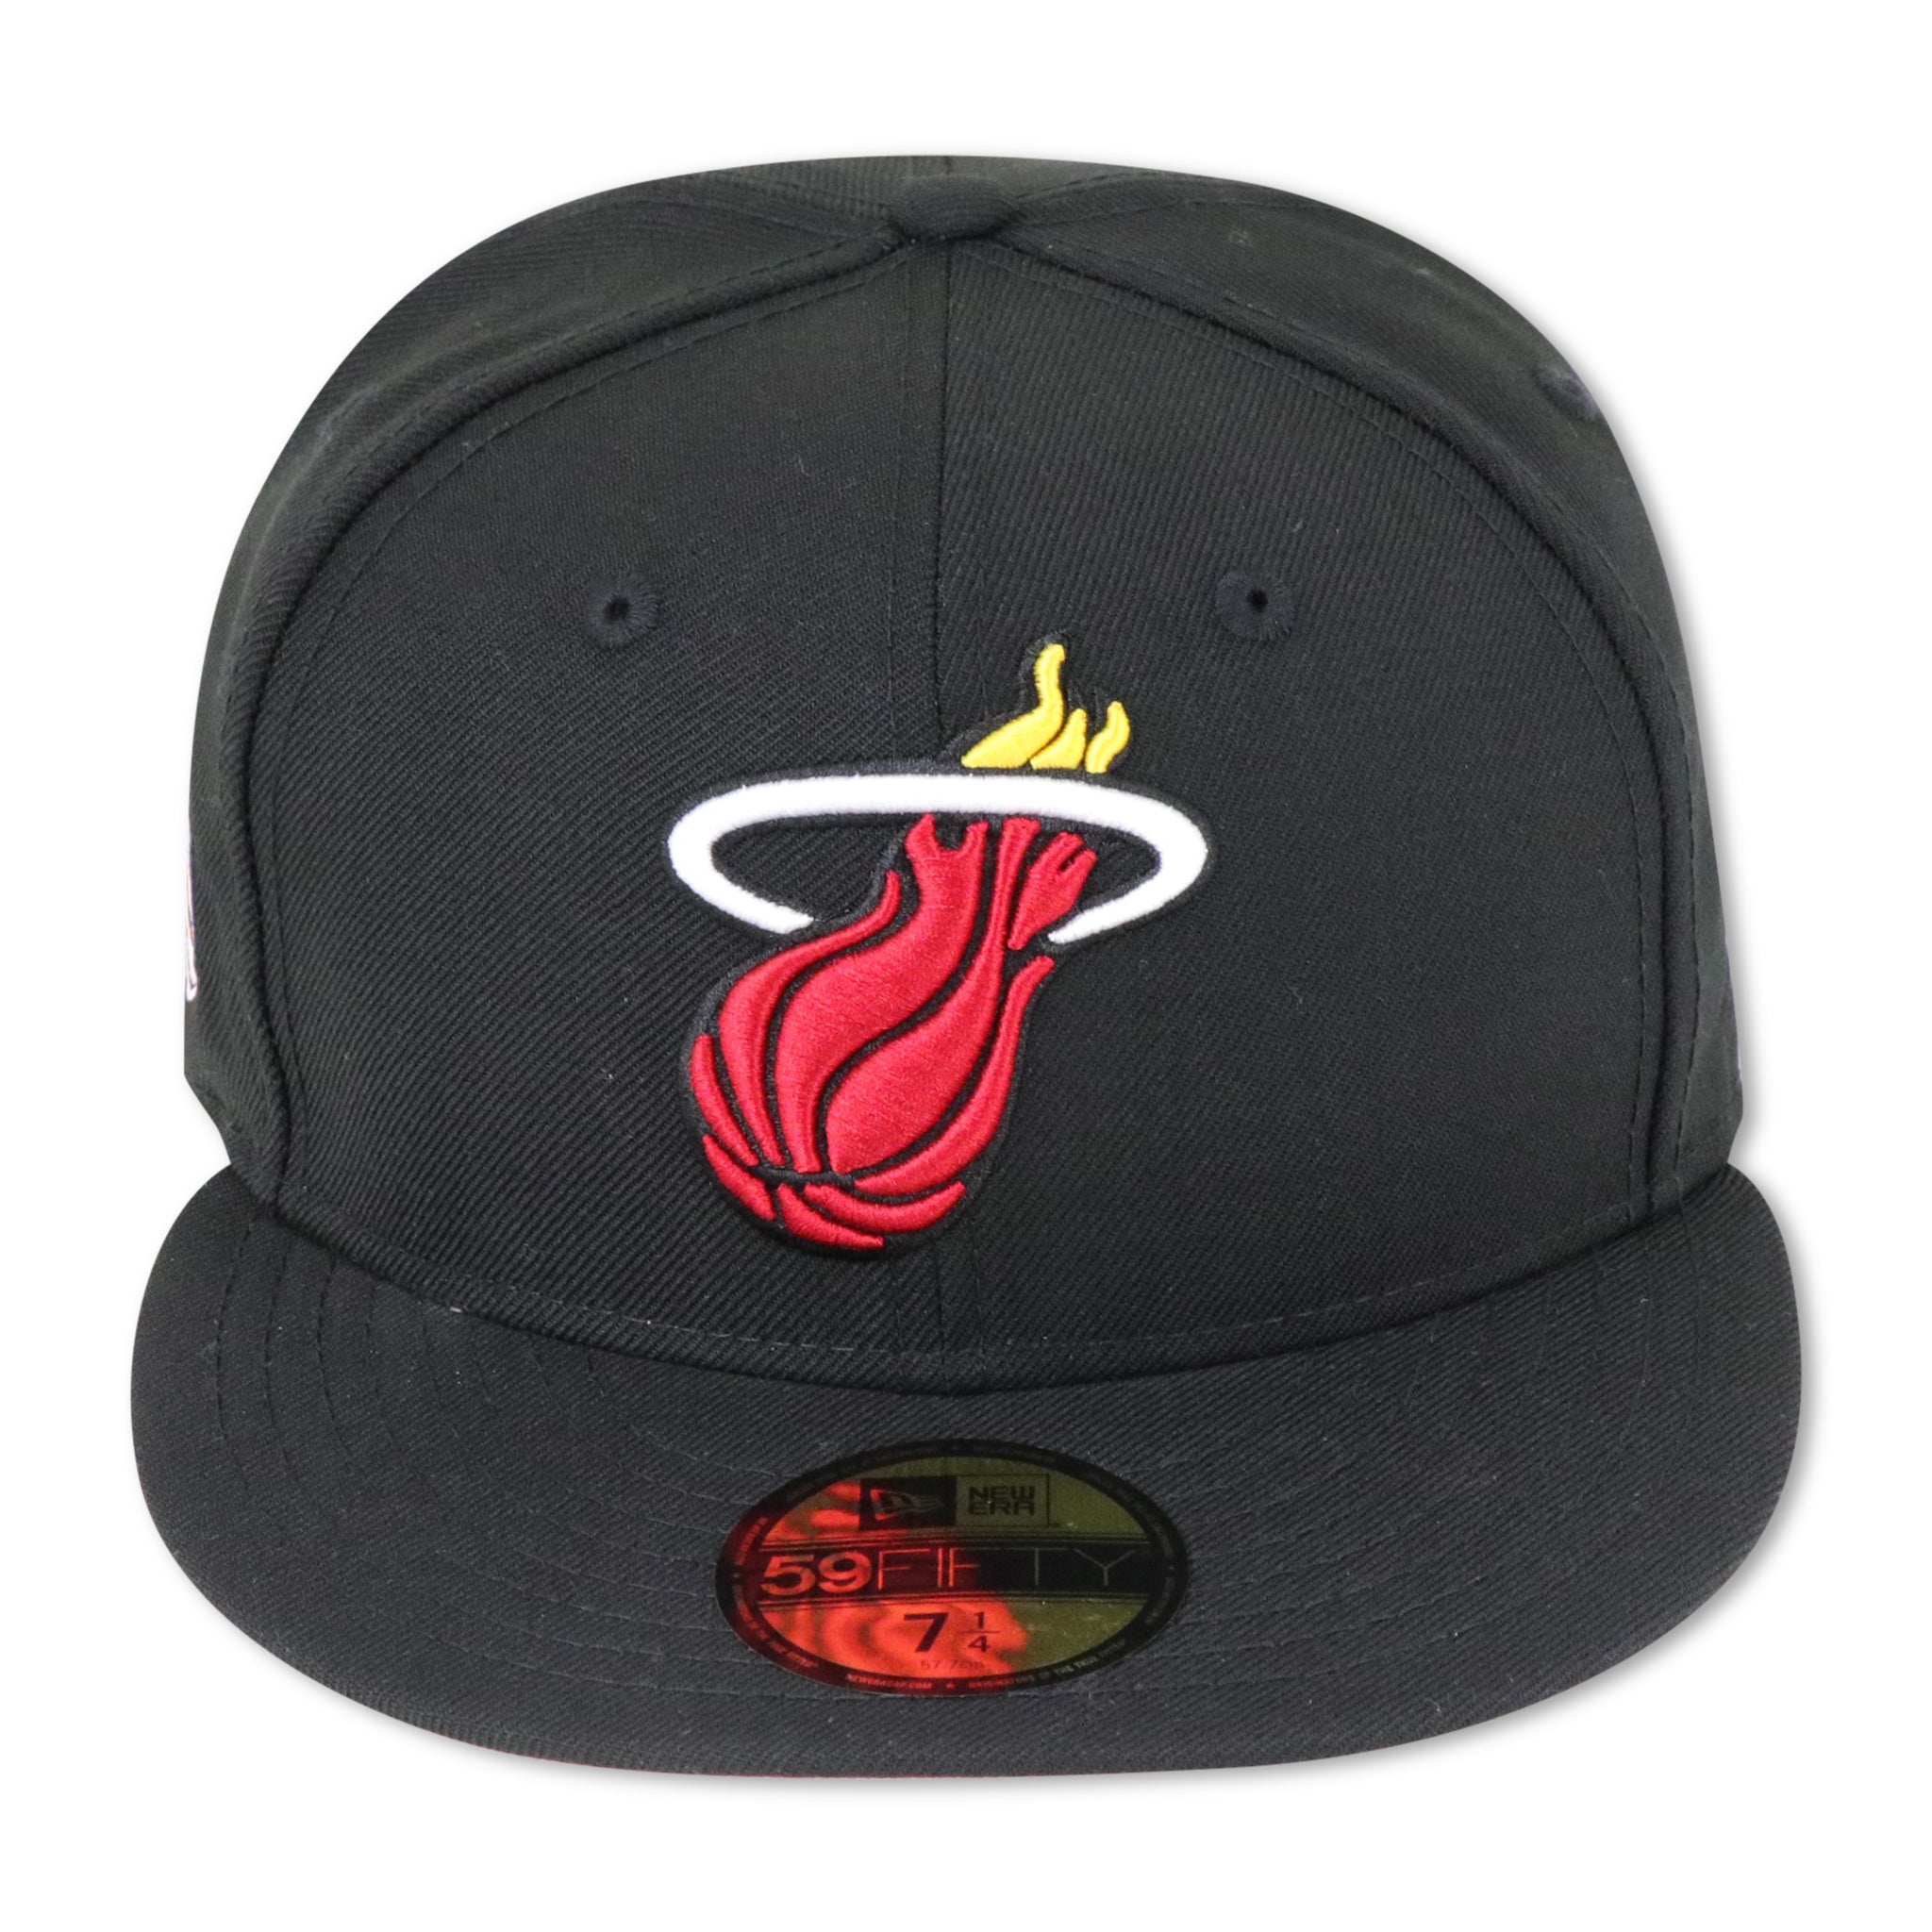 MIAMI HEAT "EASTERN CONFERENCE" NEW ERA 59FIFTY FITTED (PINK BOTTOM)